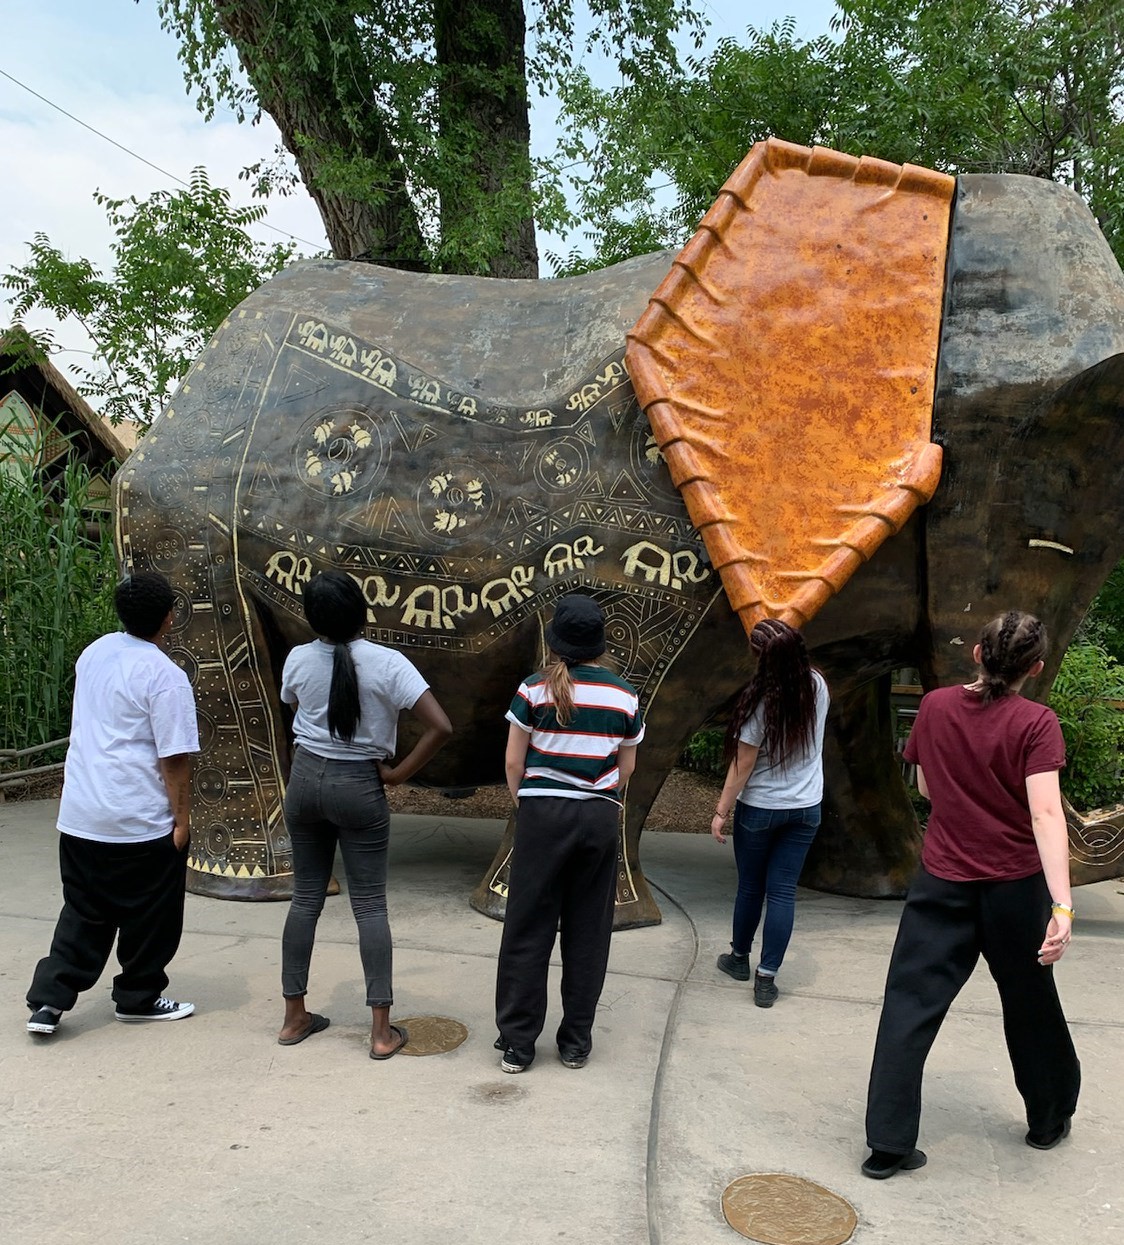 the backs of a group of kids in front of a large outdoor statue of an elephant